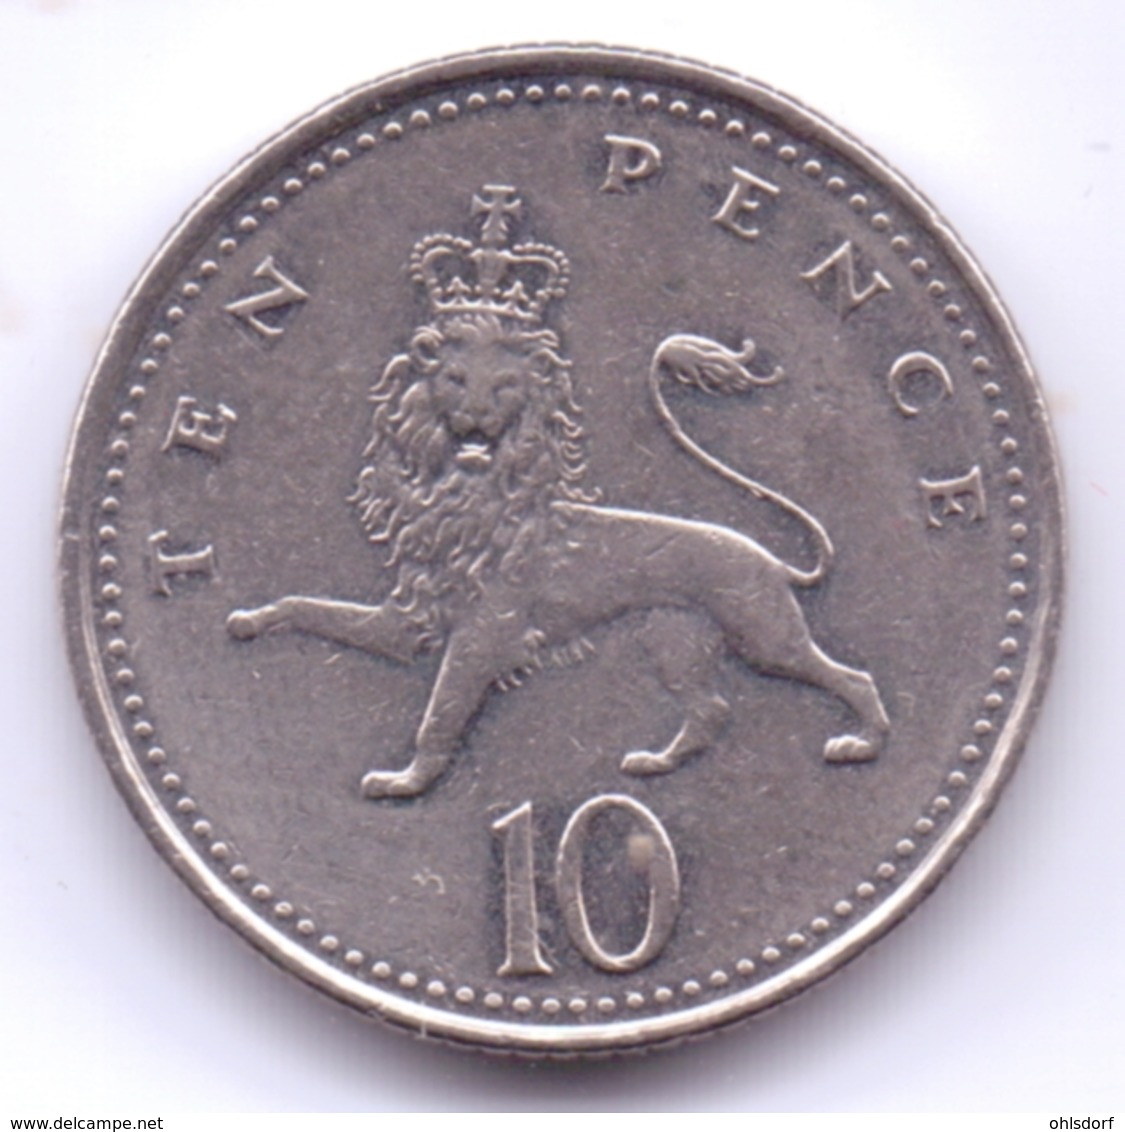 GREAT BRITAIN 2000: 10 Pence, KM 989 - 10 Pence & 10 New Pence